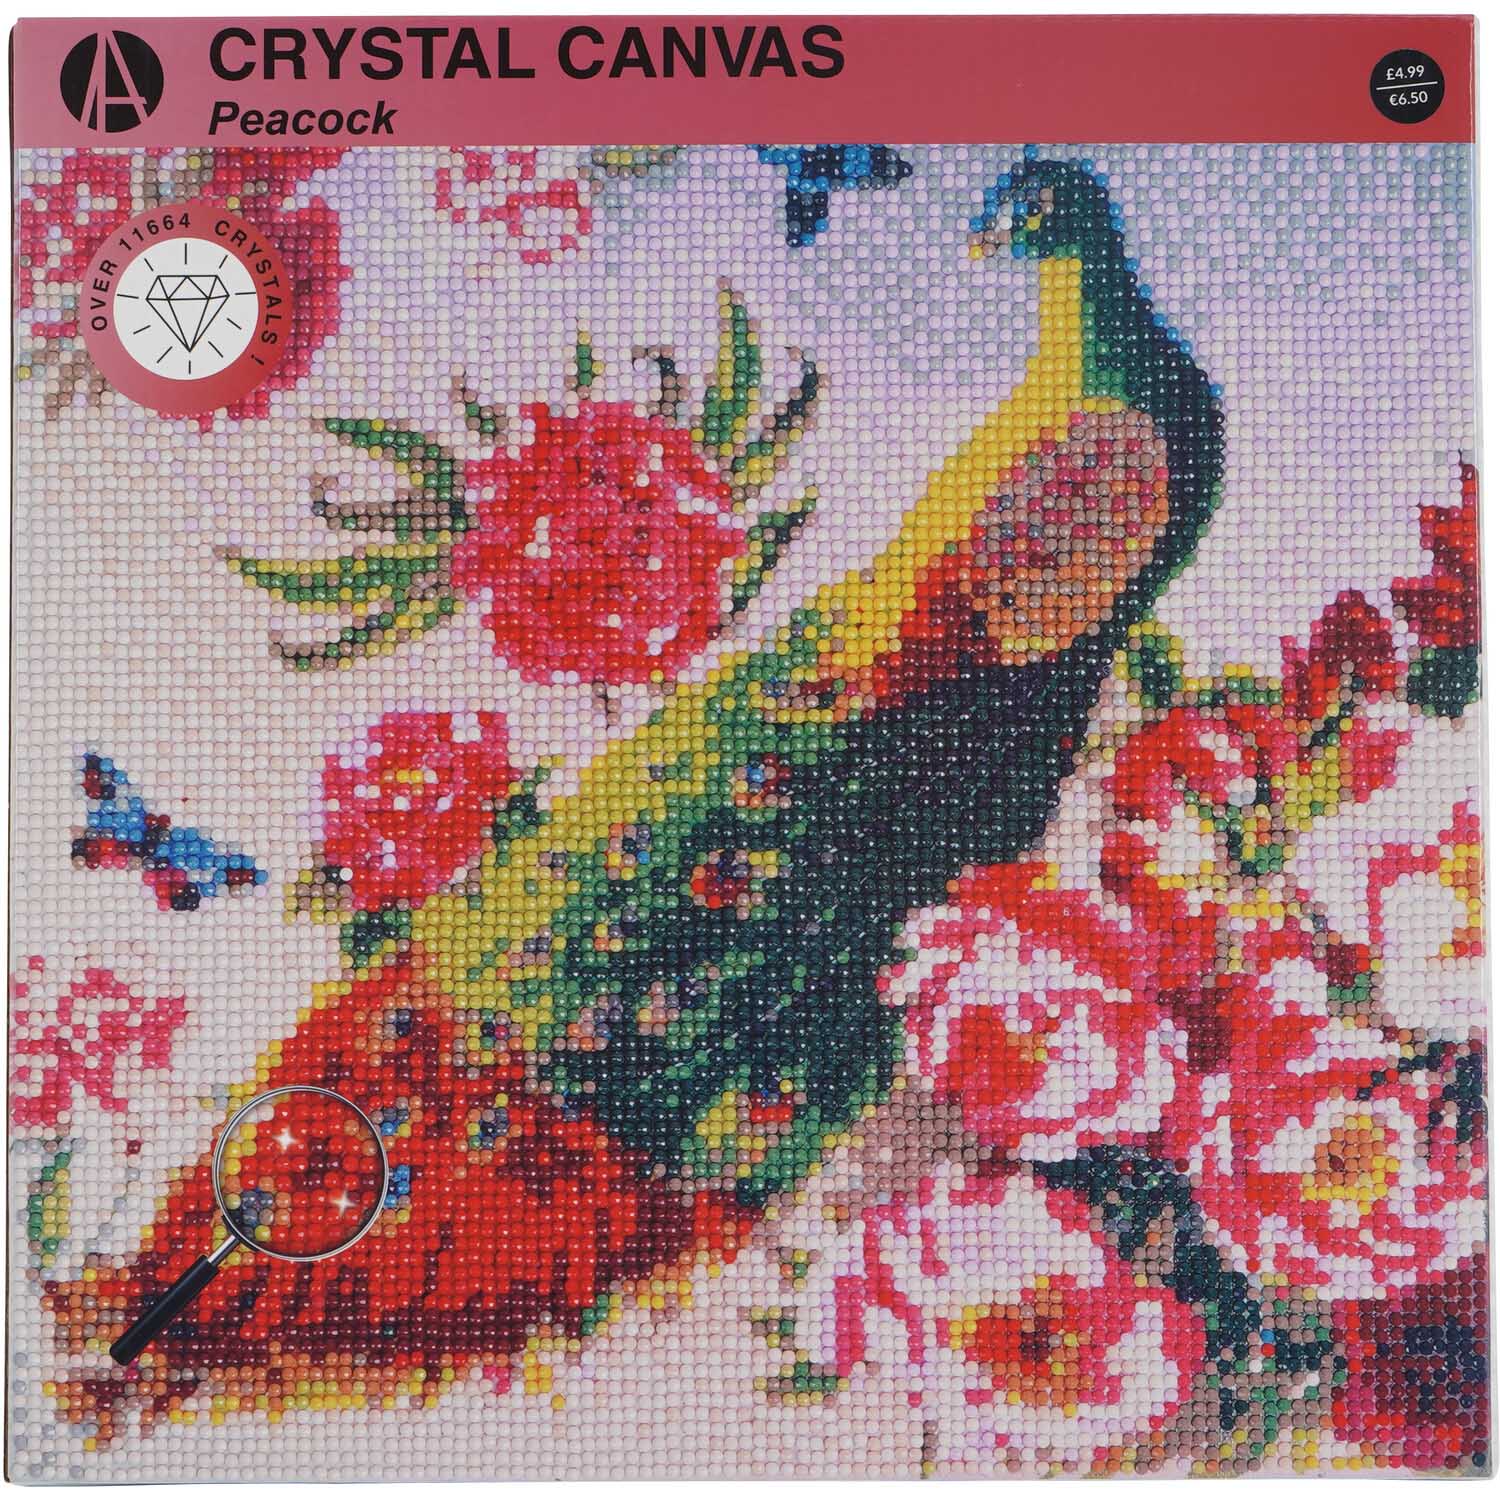 Crystal Canvas Peacock or Birds on Flowers Image 4